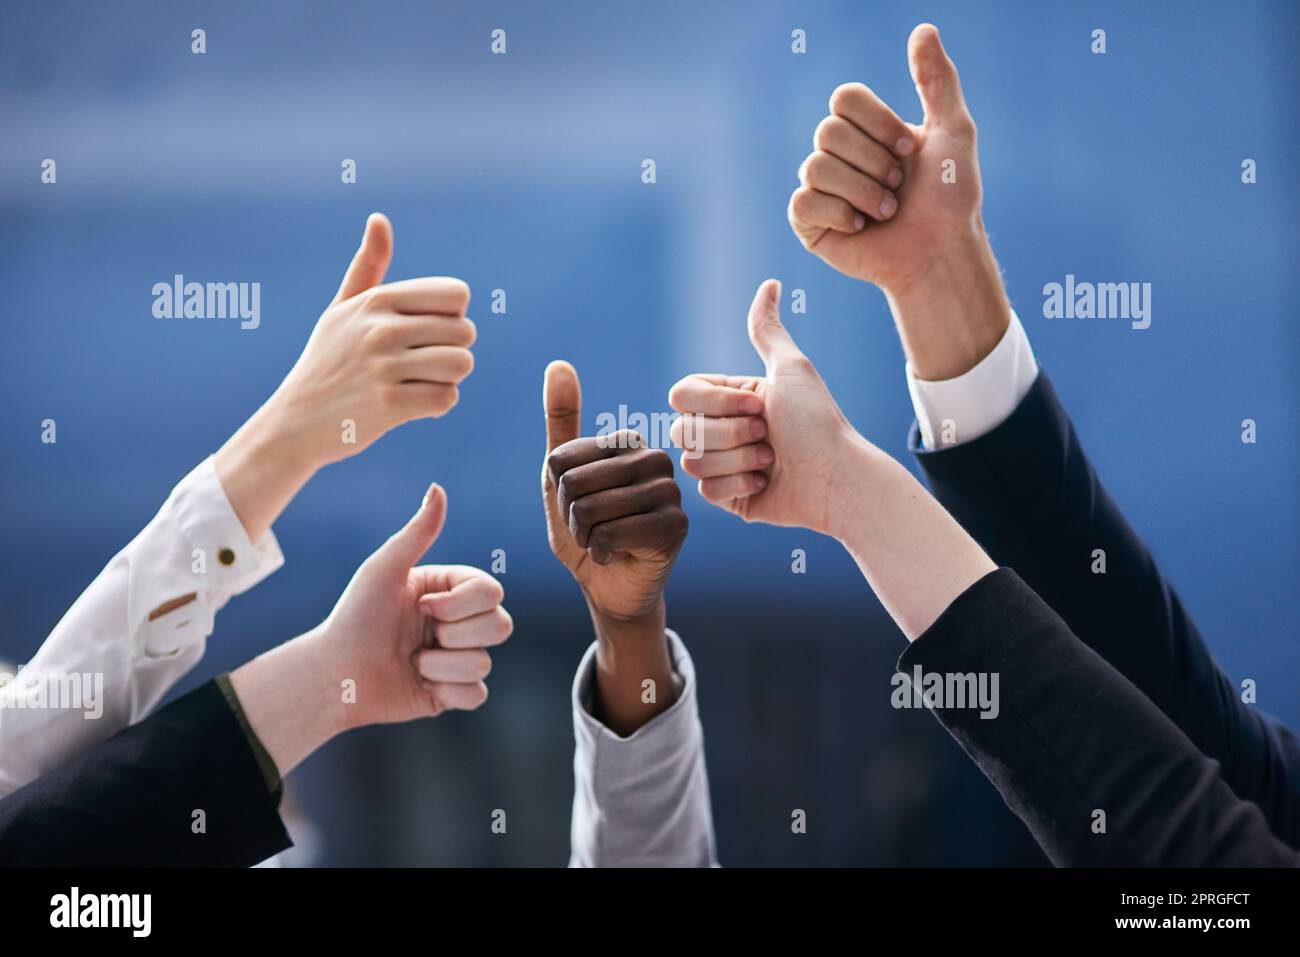 Youve done a great job. a group of office workers giving thumbs up together. Stock Photo